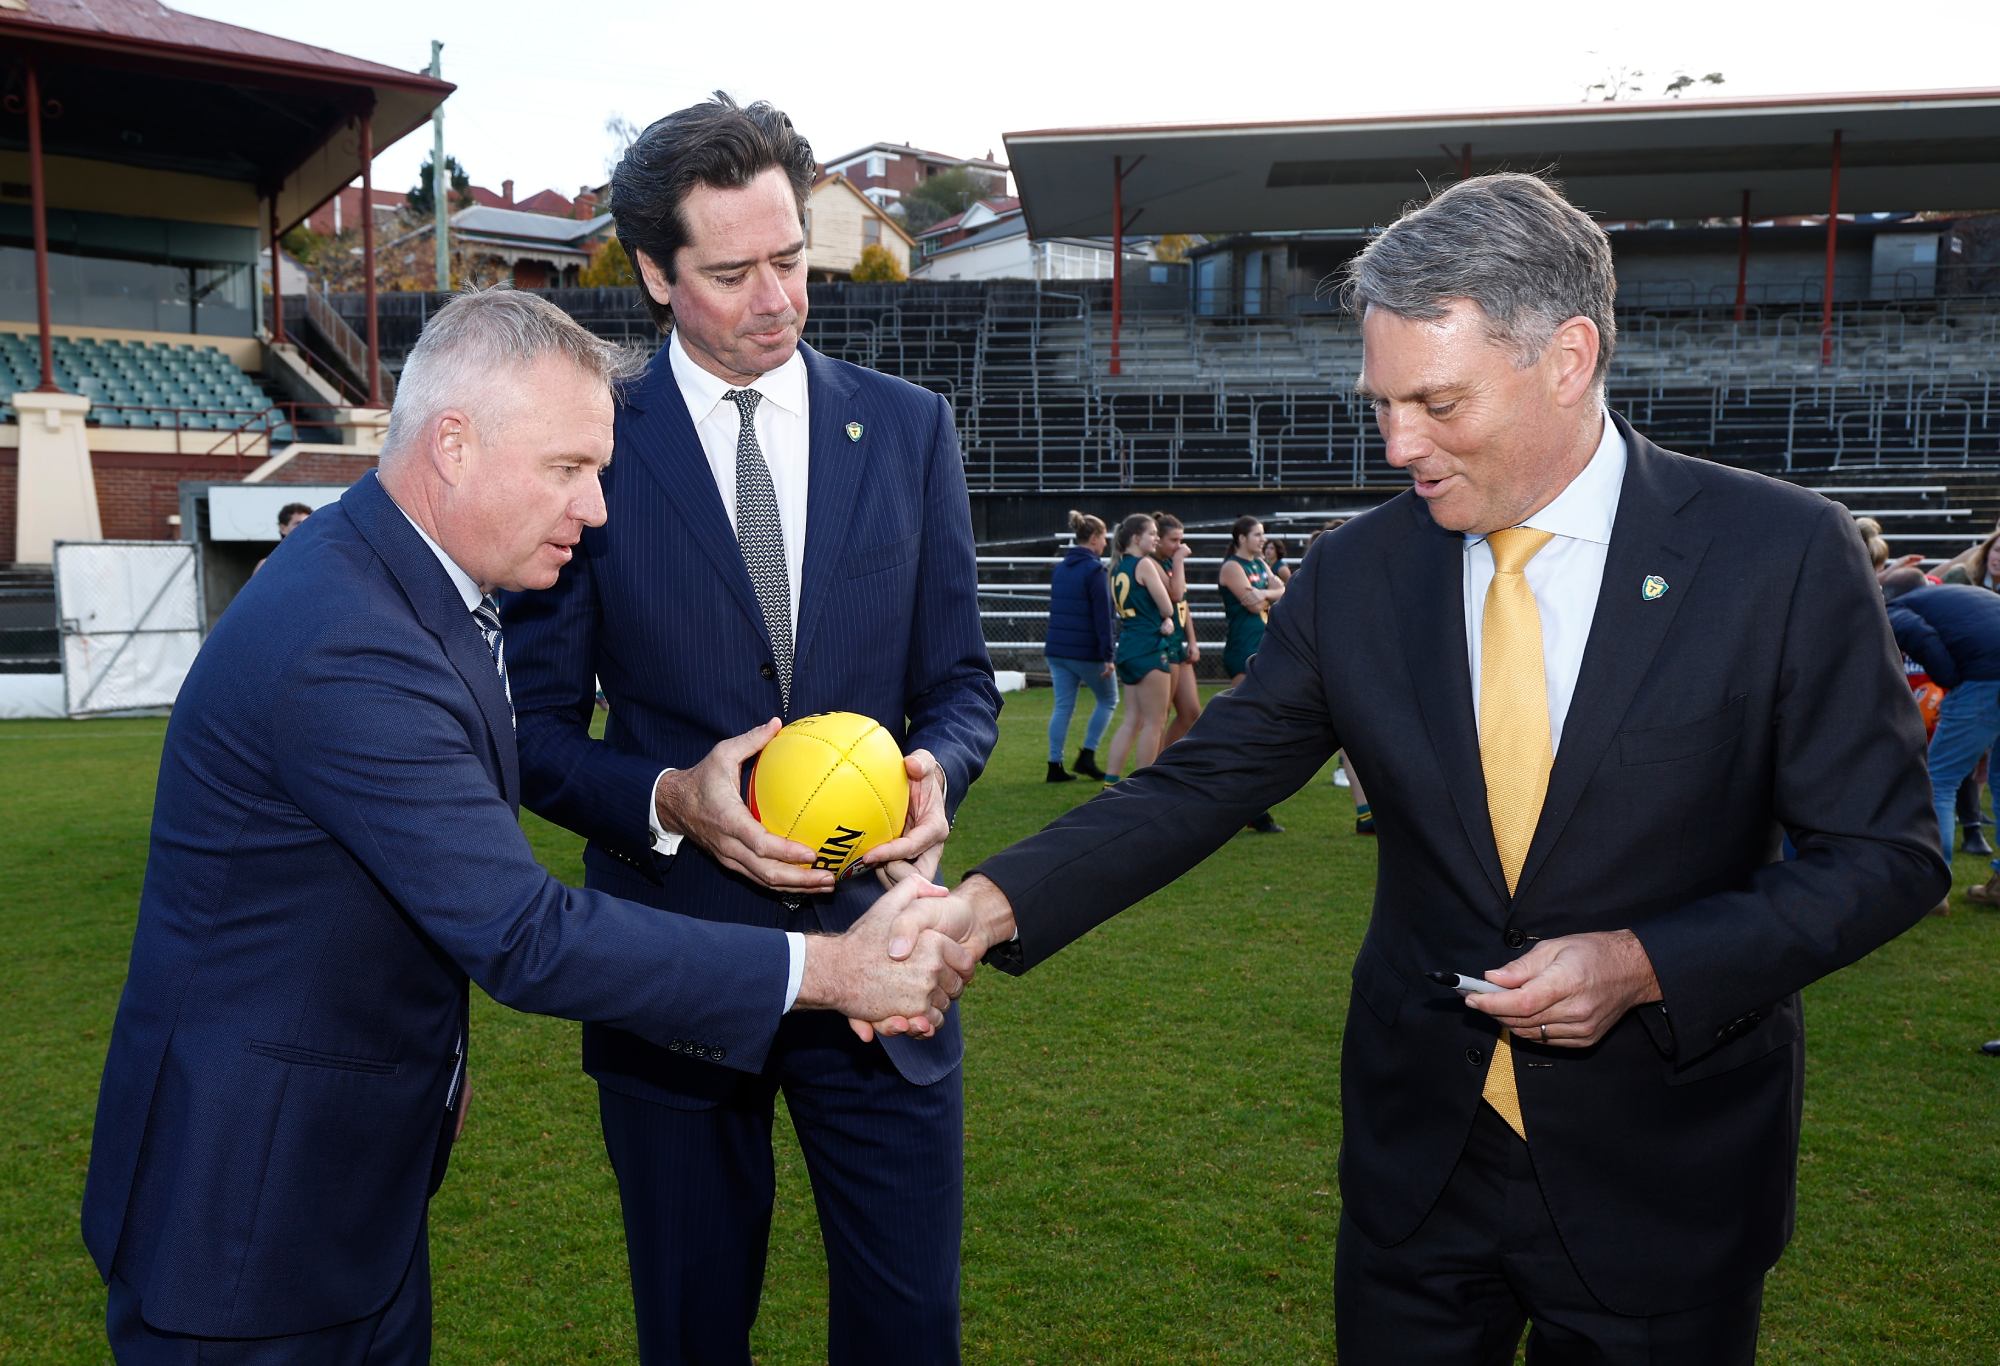 HOBART, AUSTRALIA - MAY 03: (L-R) Tasmanian Premier Jeremy Rockliff, Gillon McLachlan, Chief Executive Officer of the AFL and Deputy PM Richard Marles are seen after signing a commemorative football during the AFL Tasmanian Team Announcement at North Hobart Oval on May 03, 2023 in Hobart, Australia. (Photo by Michael Willson/AFL Photos via Getty Images)